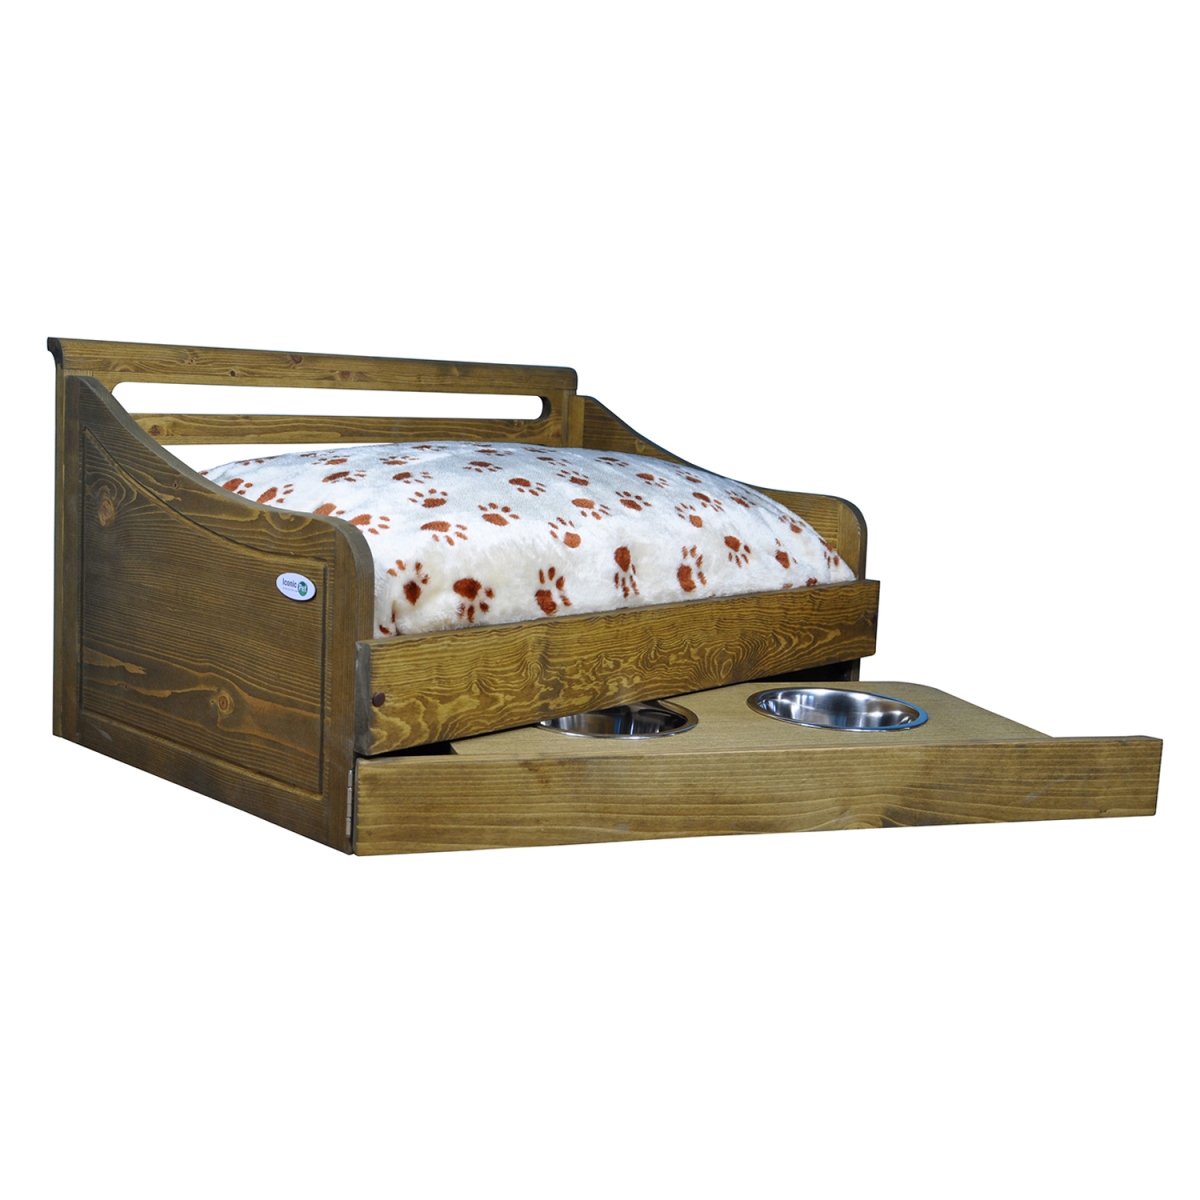 Picture of Iconic Pet 52053 Sassy Paws Multipurpose Wooden Pet Bed with Feeder, Rustic Brown - Small